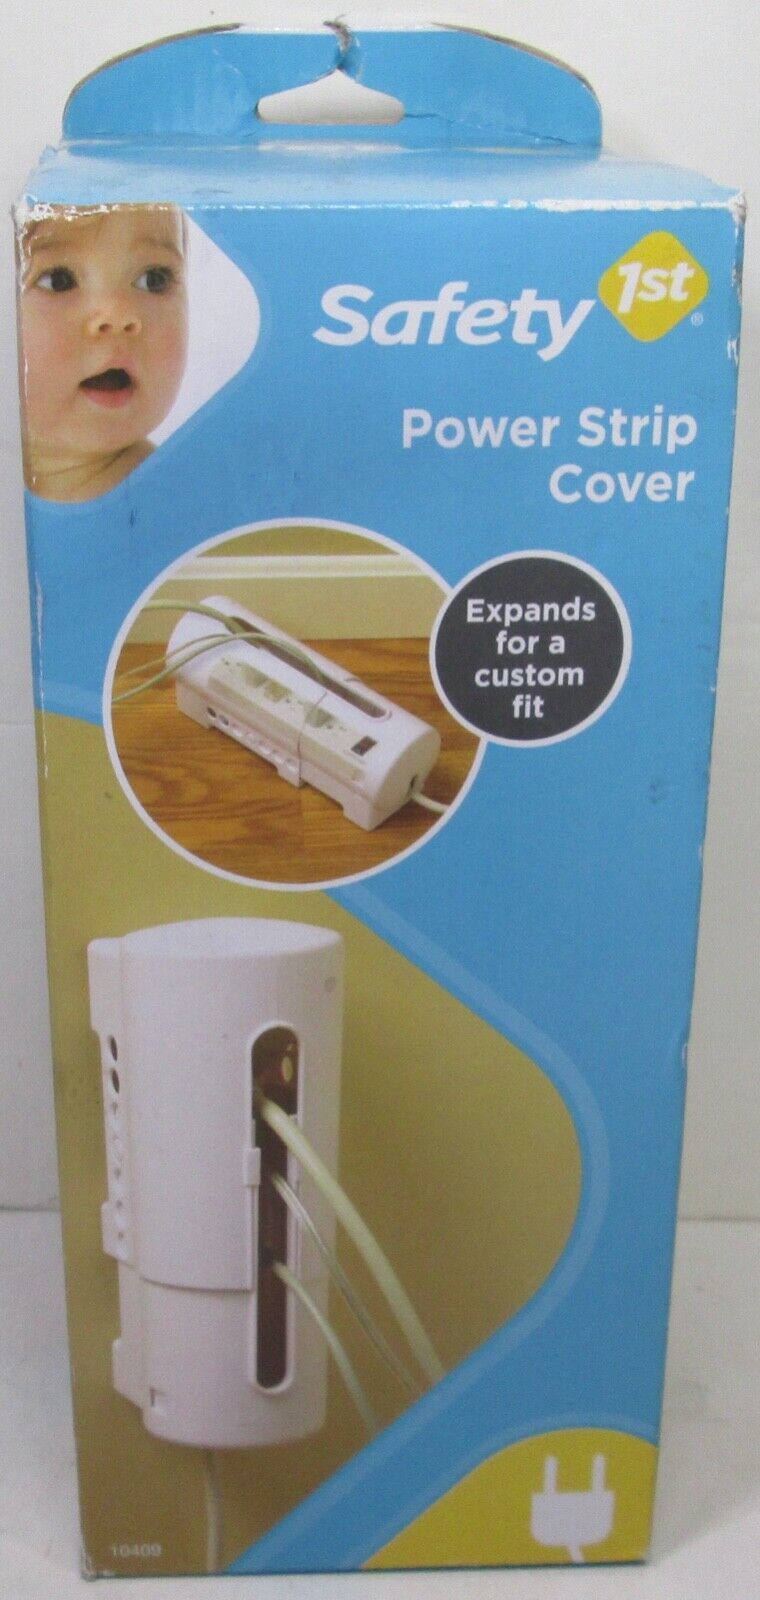 Safety 1st Power Strip Cover - Expands for a Custom Fit  - New - $12.34